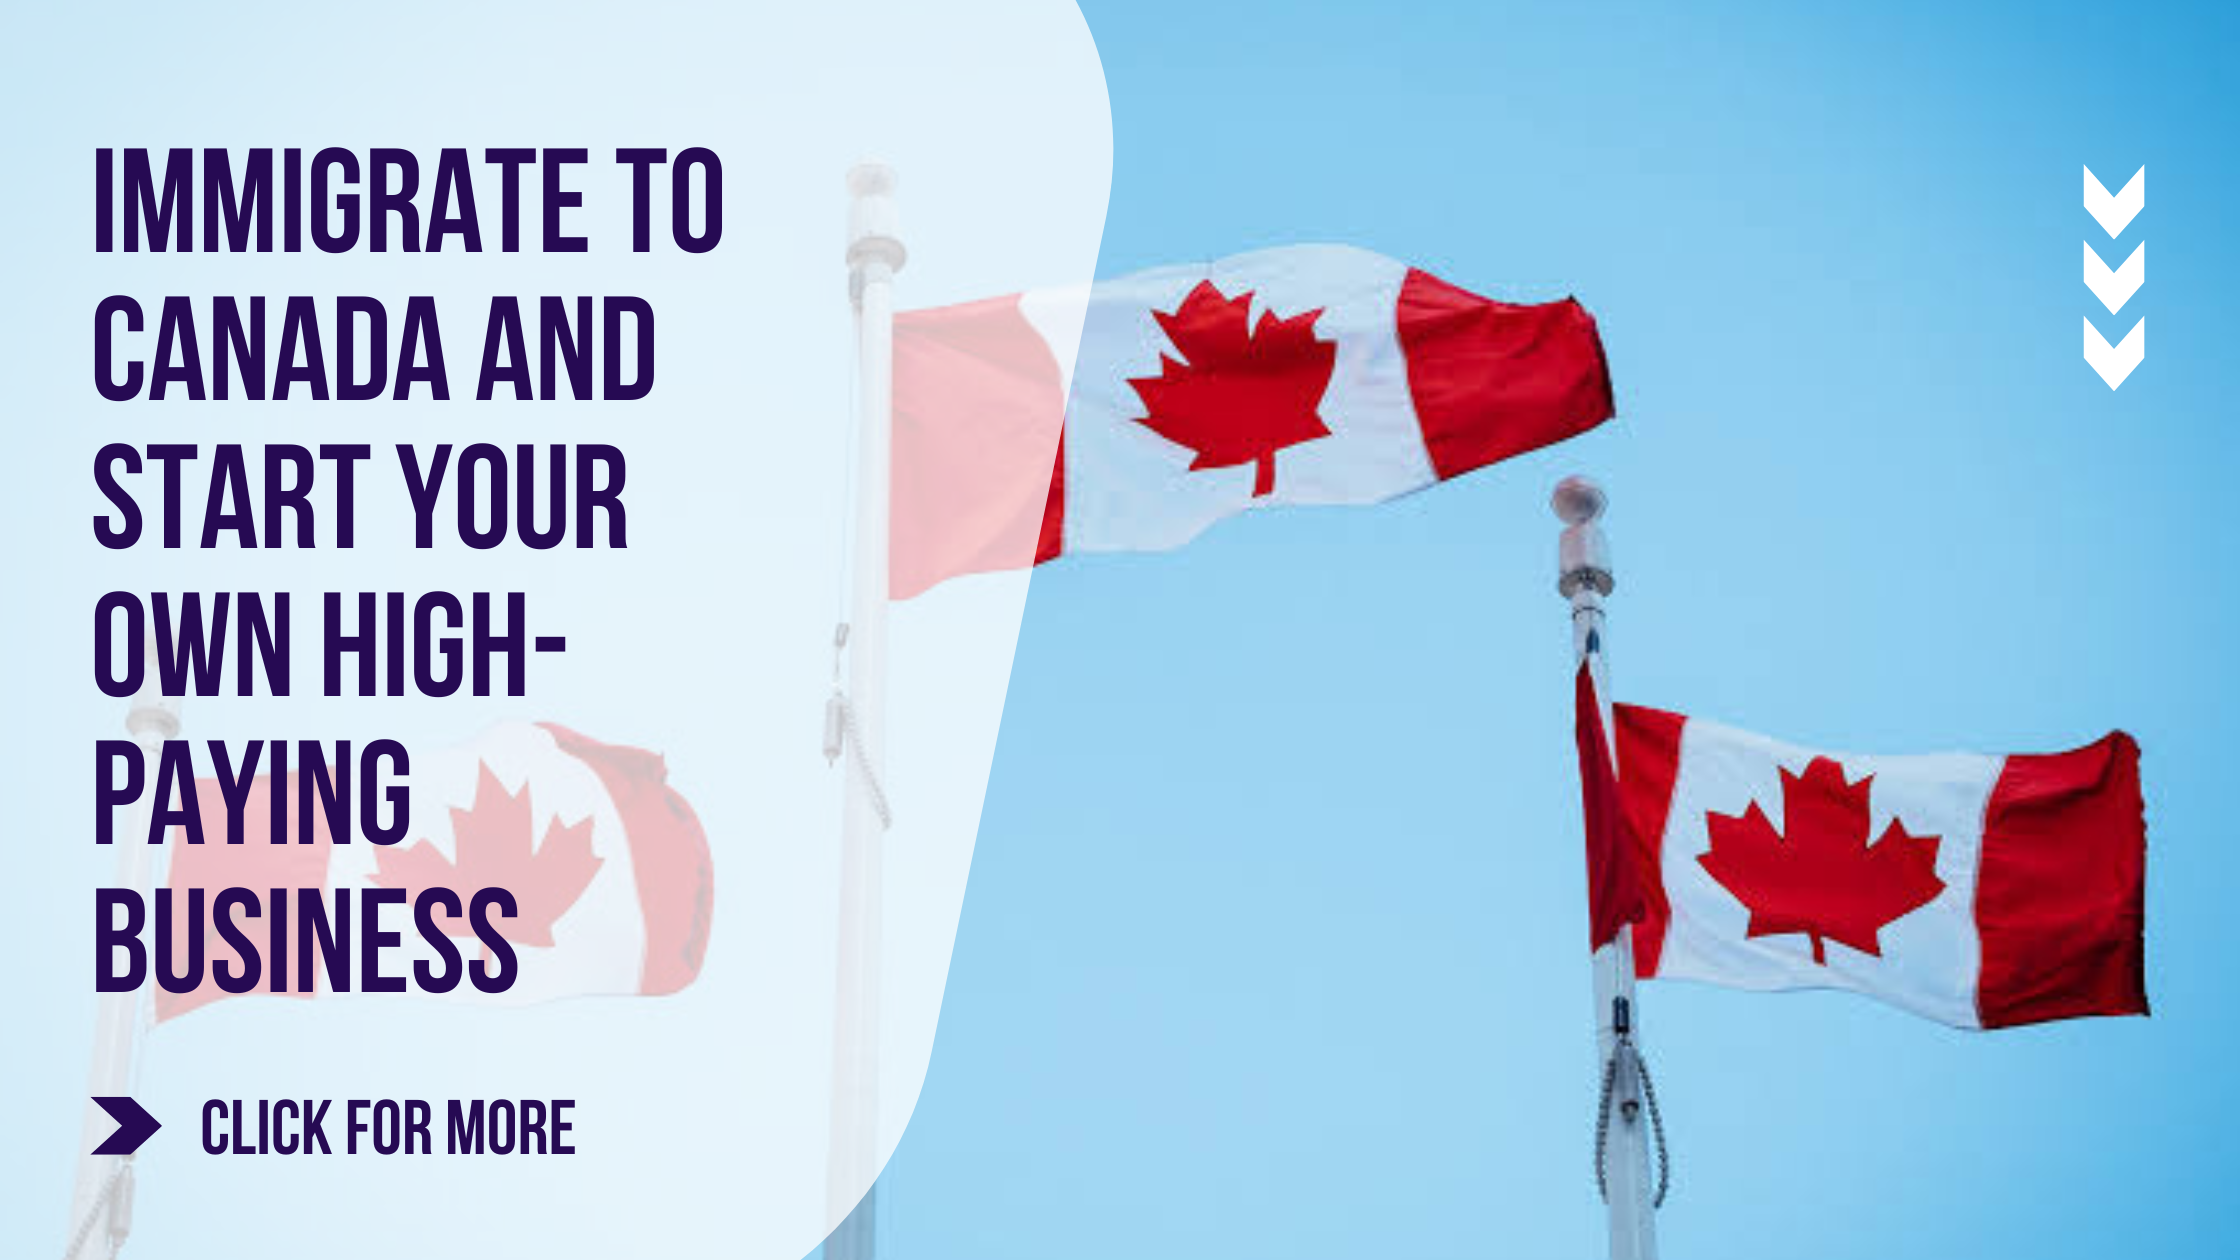 How to Immigrate to Canada and Start Your Own High-Paying Business